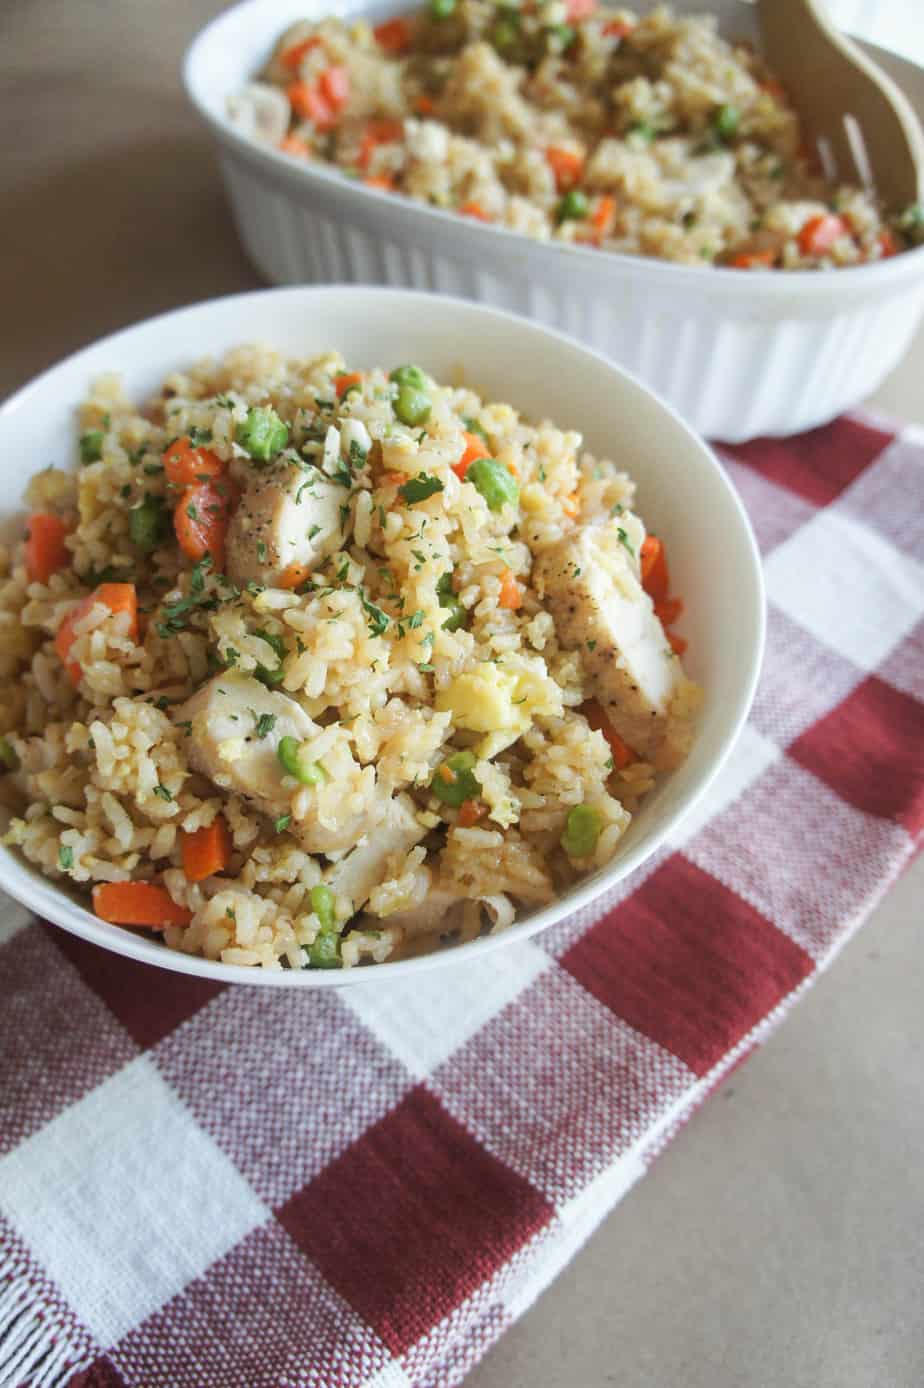 Chicken Fried Rice is the perfect summertime dish because it is made in under 30 minutes from start to finish!